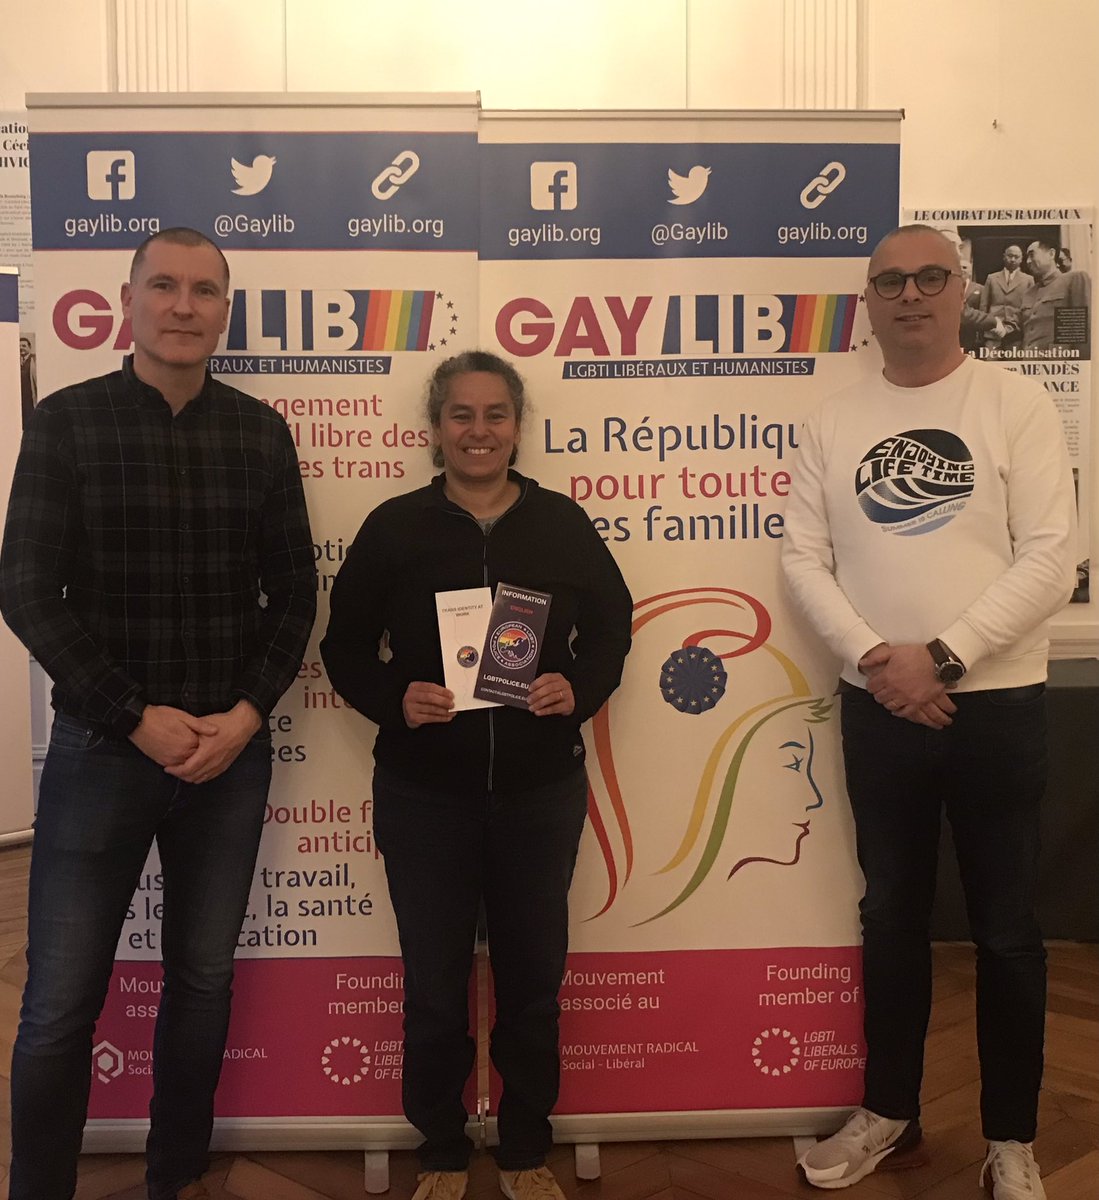 👮‍♂️GayLib received @lgbtpoliceeu network 🇪🇺 of police officers #LGBT
Fruitful exchanges about their work & organisation,our action in @LGBTI_Liberals,the necessary EU harmonisation of
✅police officers & judges training
✅good practices to receive & take care of LGBTphobia victims